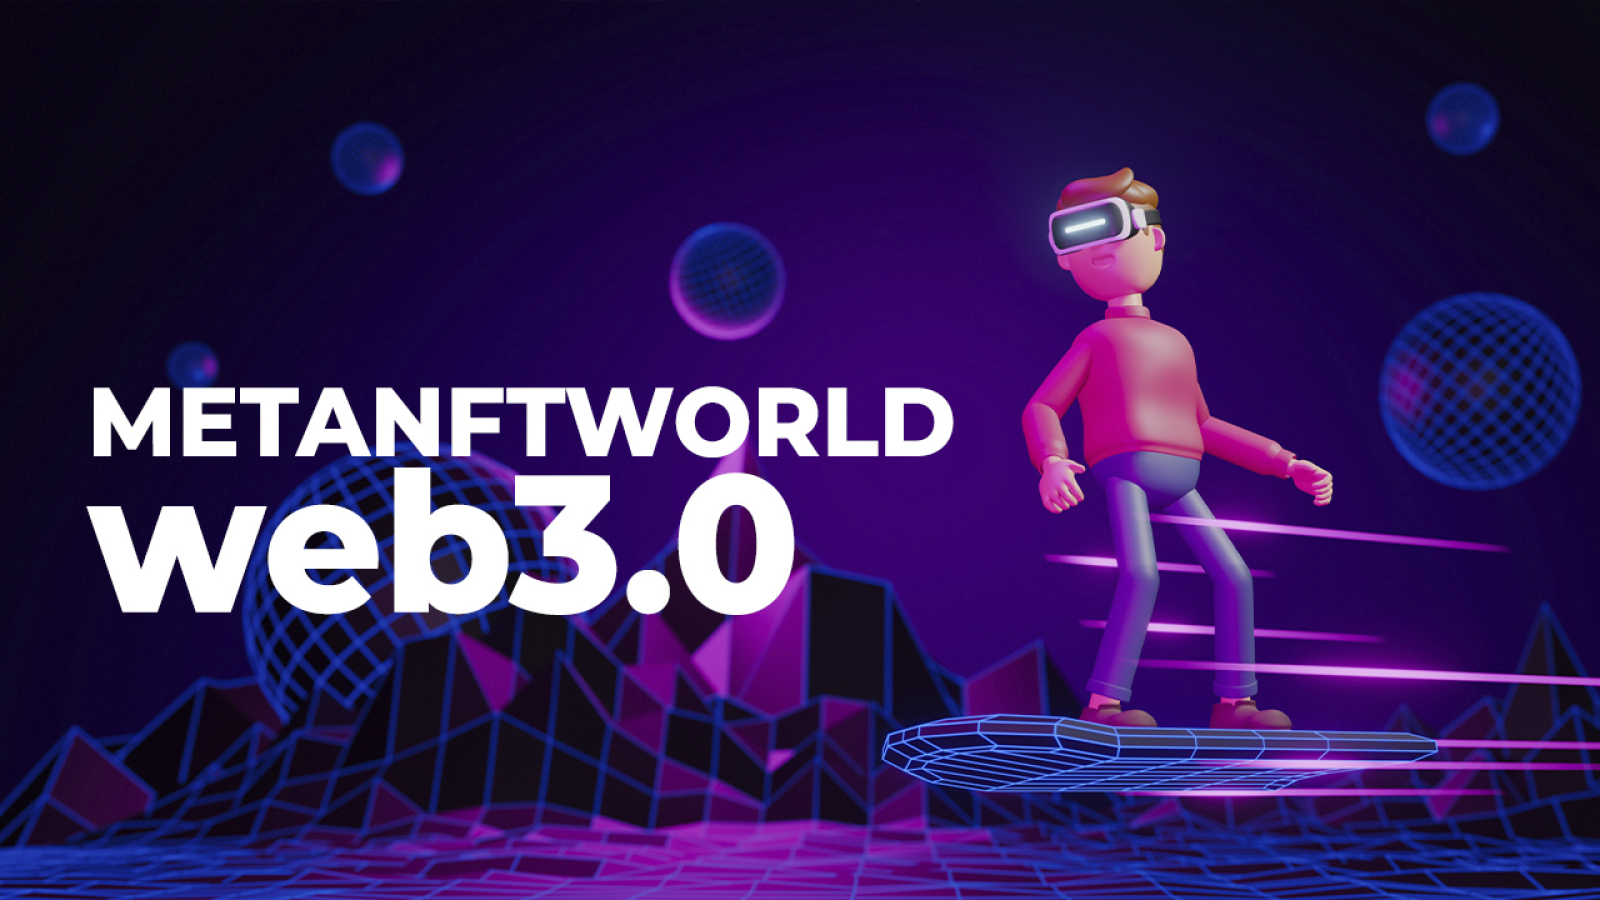 METANFTWORLD Launches NFT Marketplace Dedicated to the Web3.0